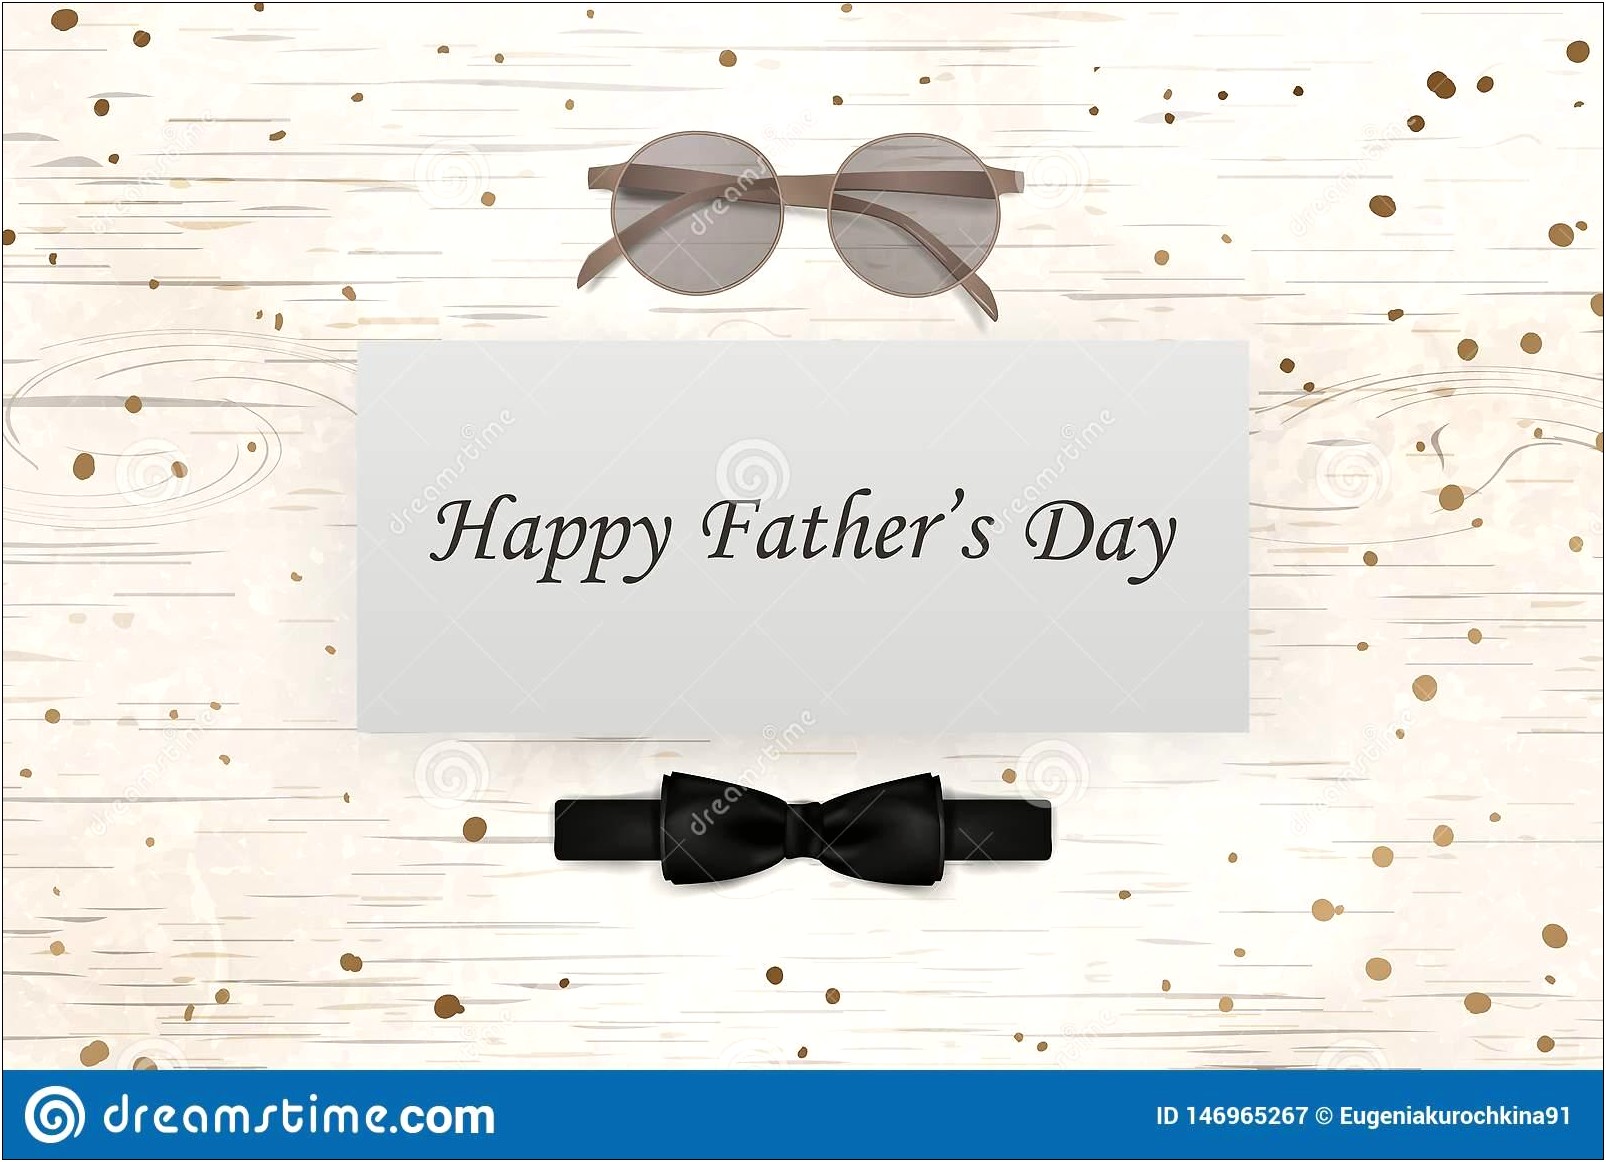 Free Father's Day Invitation Card Template